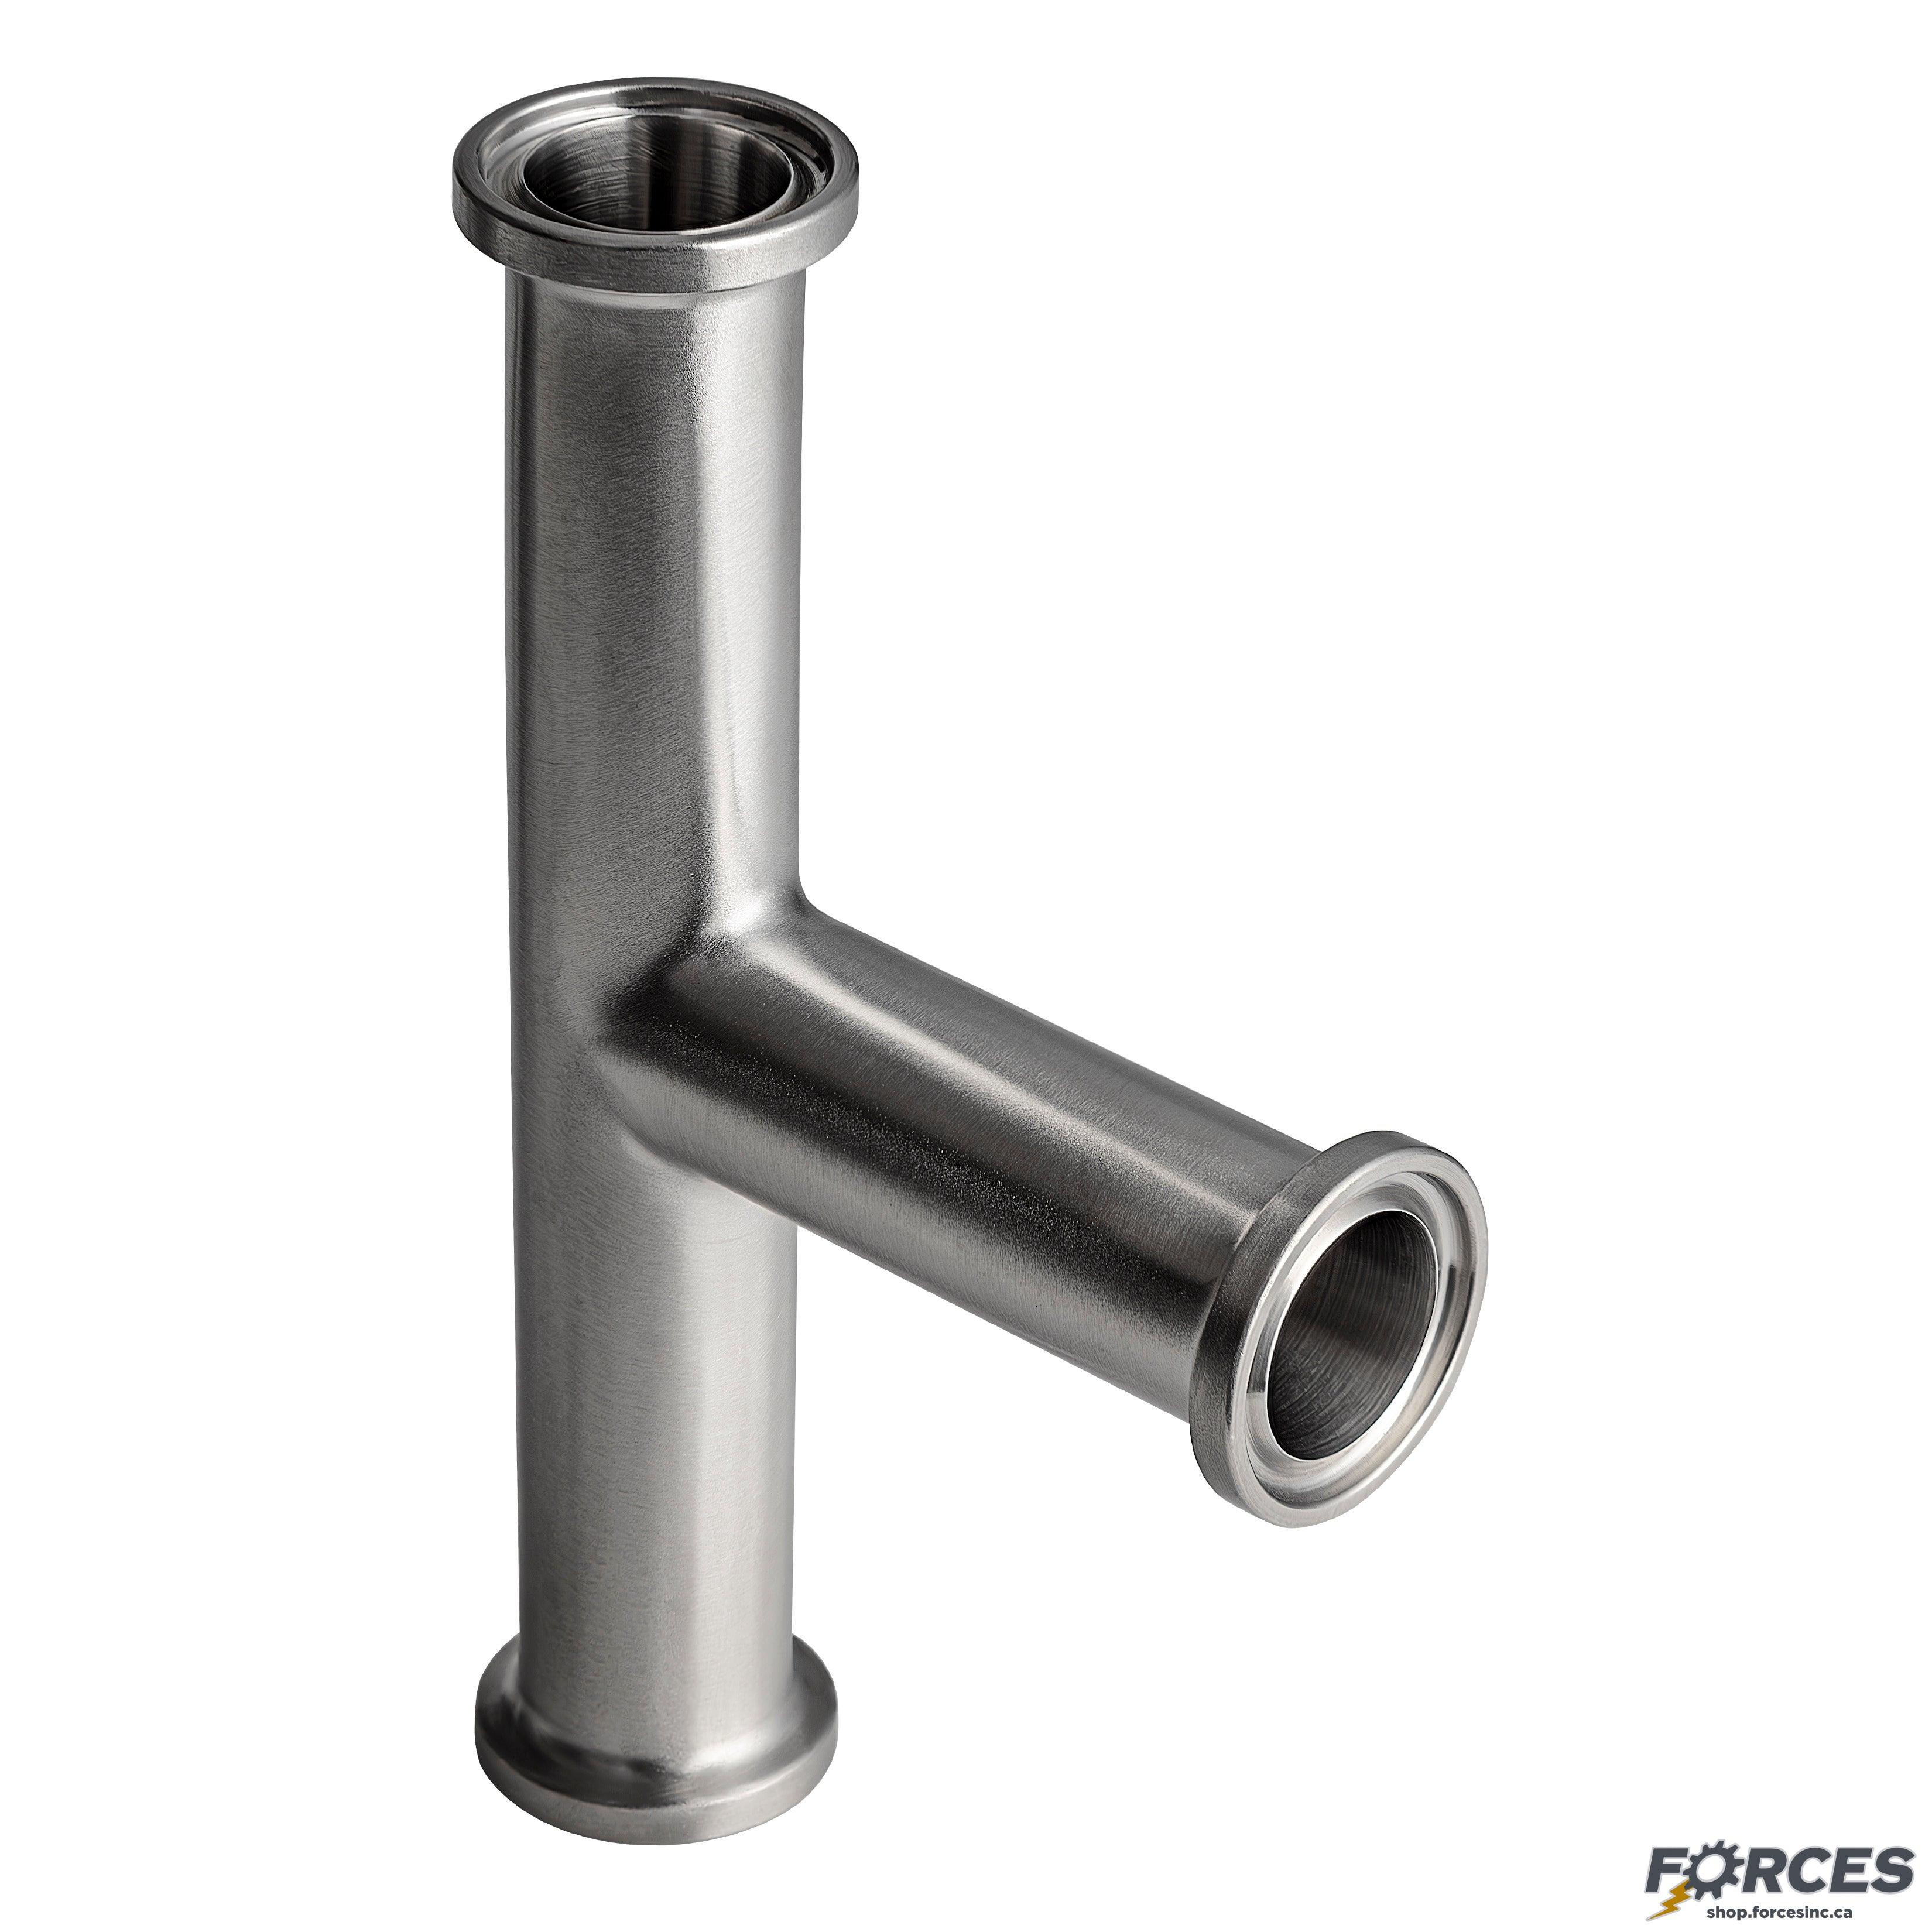 1/2" Tri-Clamp Tee - Stainless Steel 316 - Forces Inc